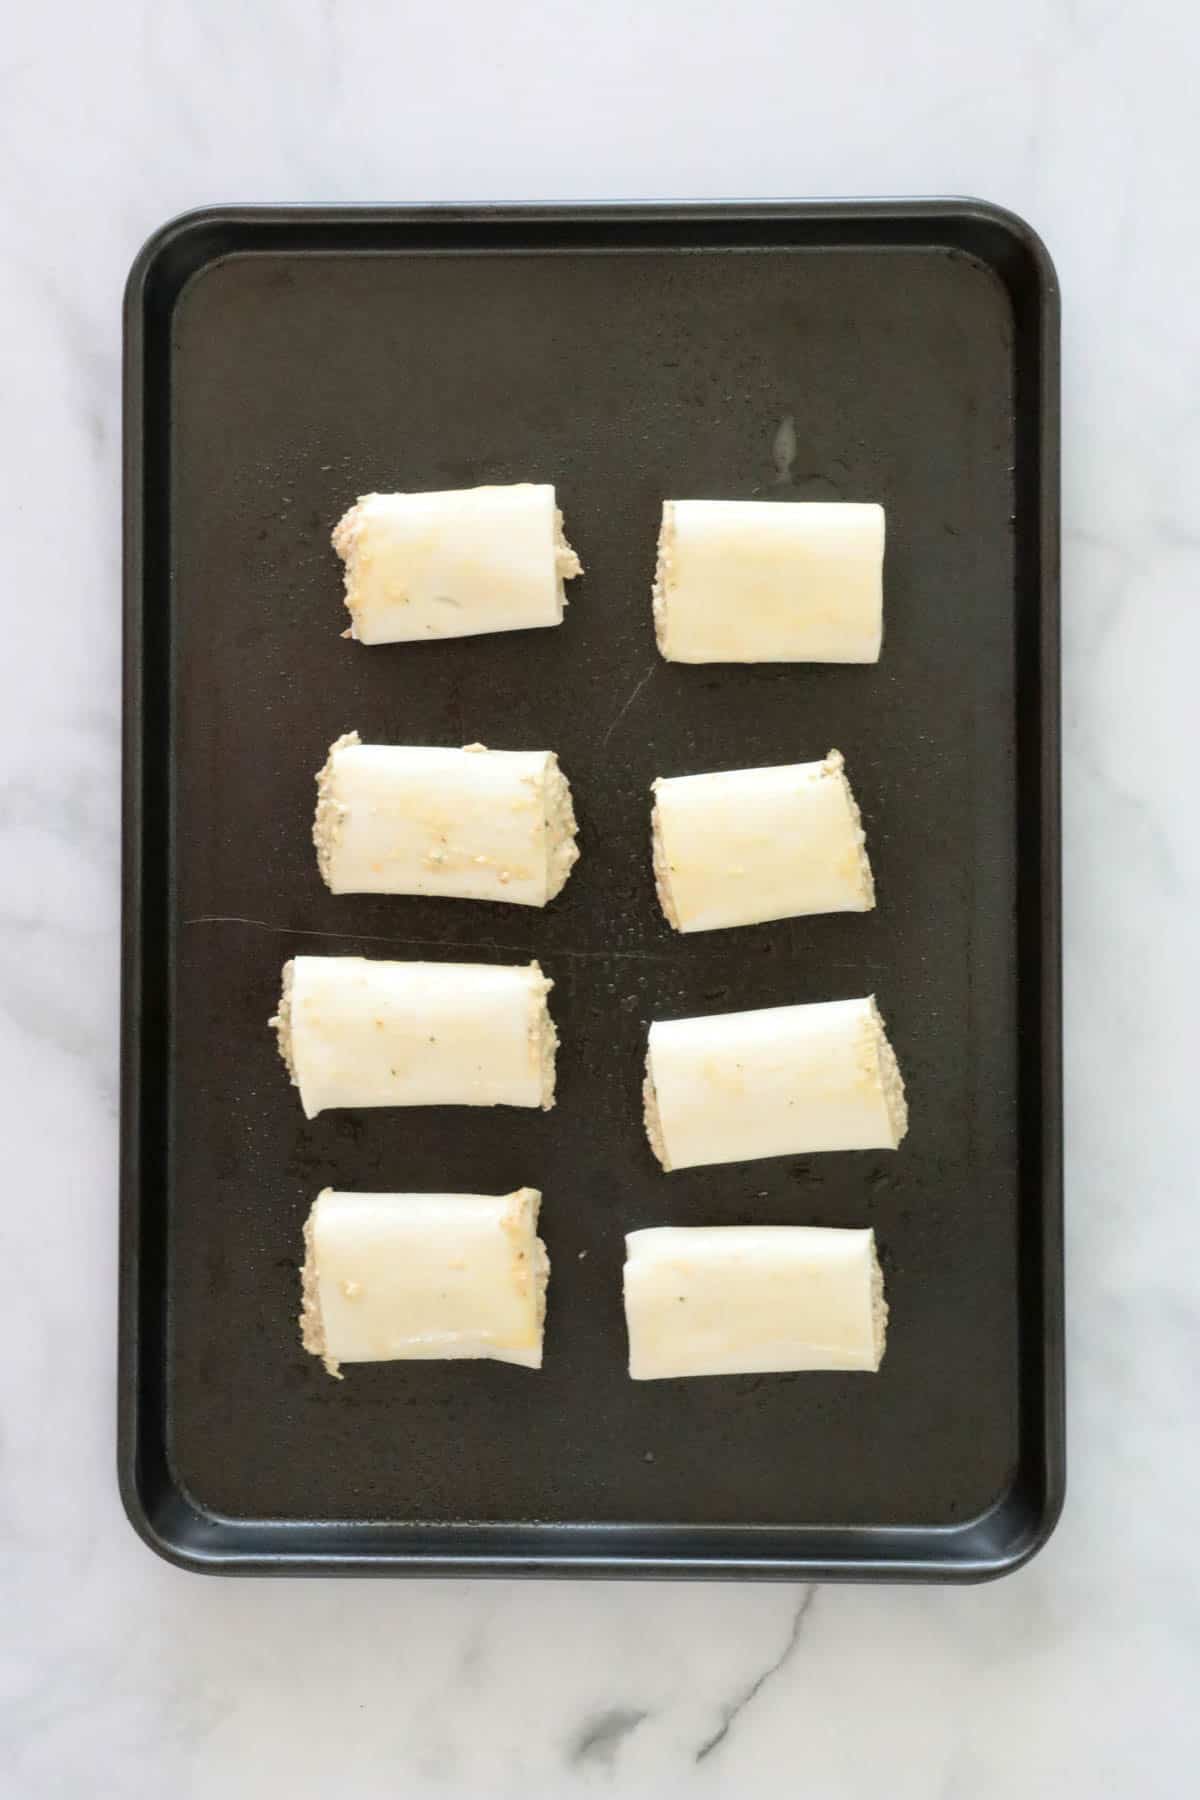 Sausage rolls on a baking tray.